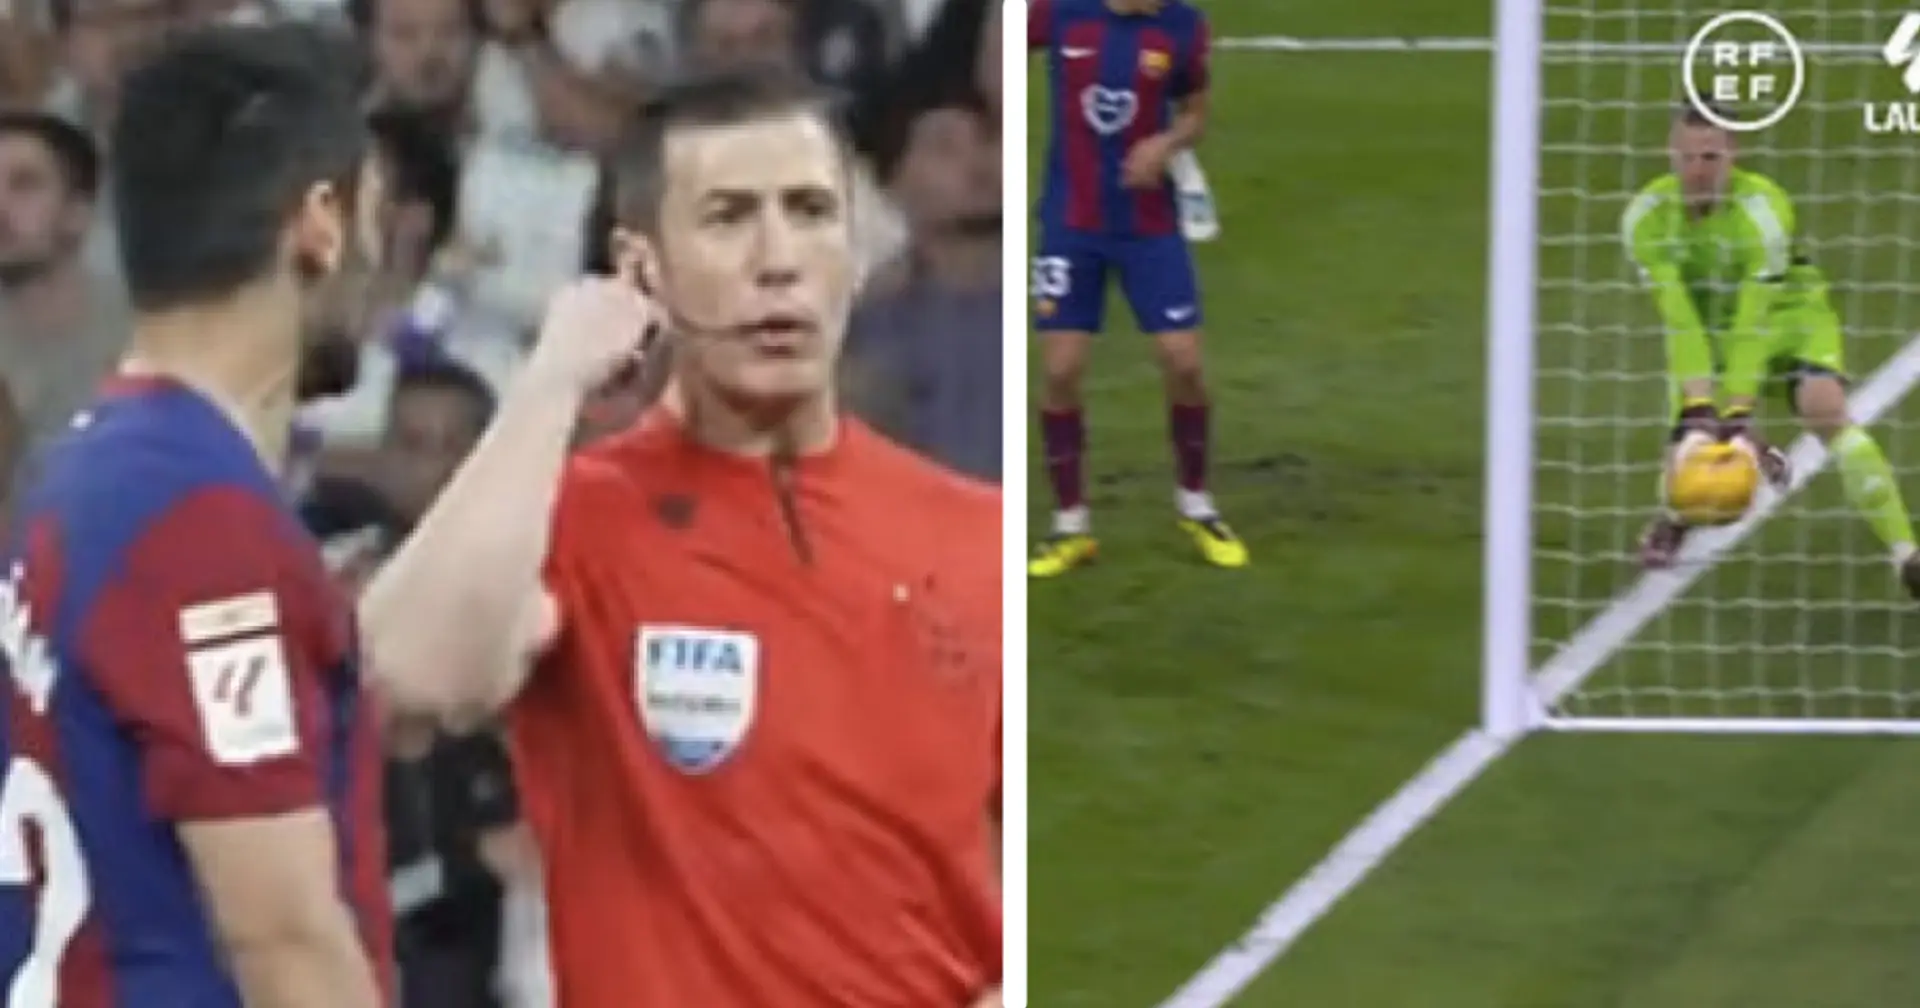 'They have no other angles': VAR audio during Lamine Yamal goal check leaked